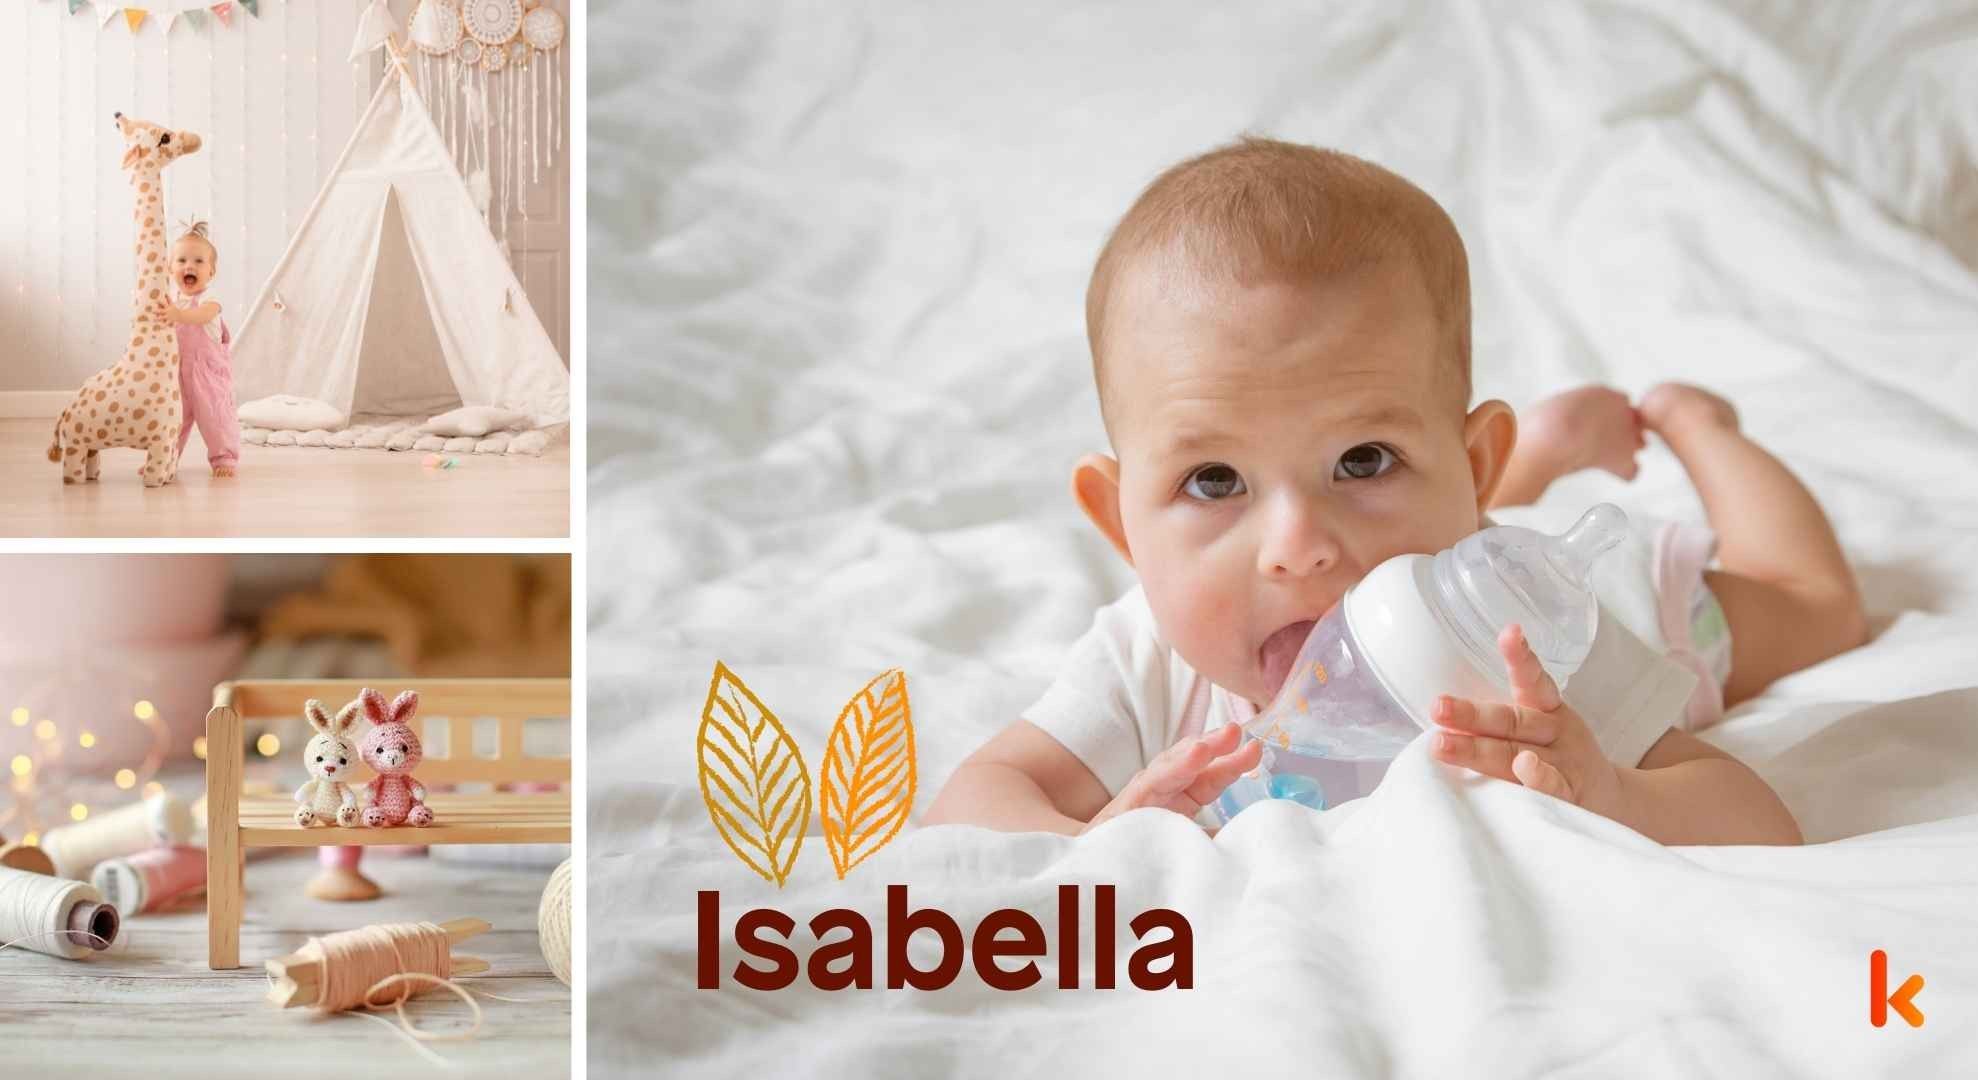 Meaning of the name Isabella